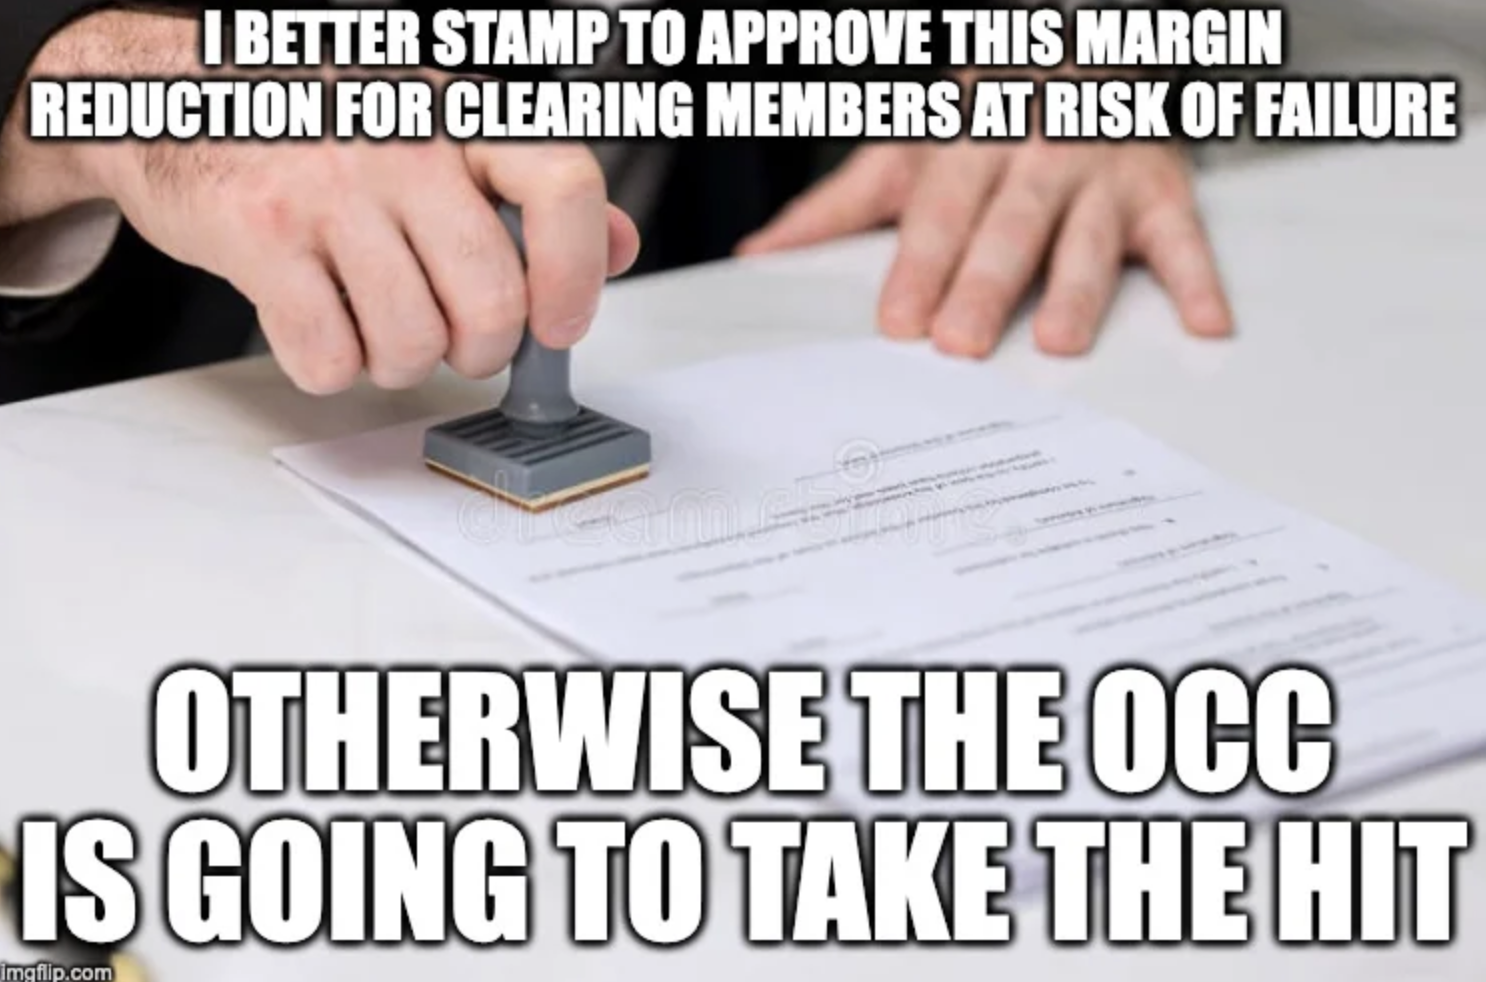 MEME: I BETTER STAMP TO APPROVE THIS MARGIN REDUCTION FOR CLEARING MEMBERS AT THE RISK OF FAILURE - OTHERWISE THE OCC IS GOING TO TAKE THE HIT